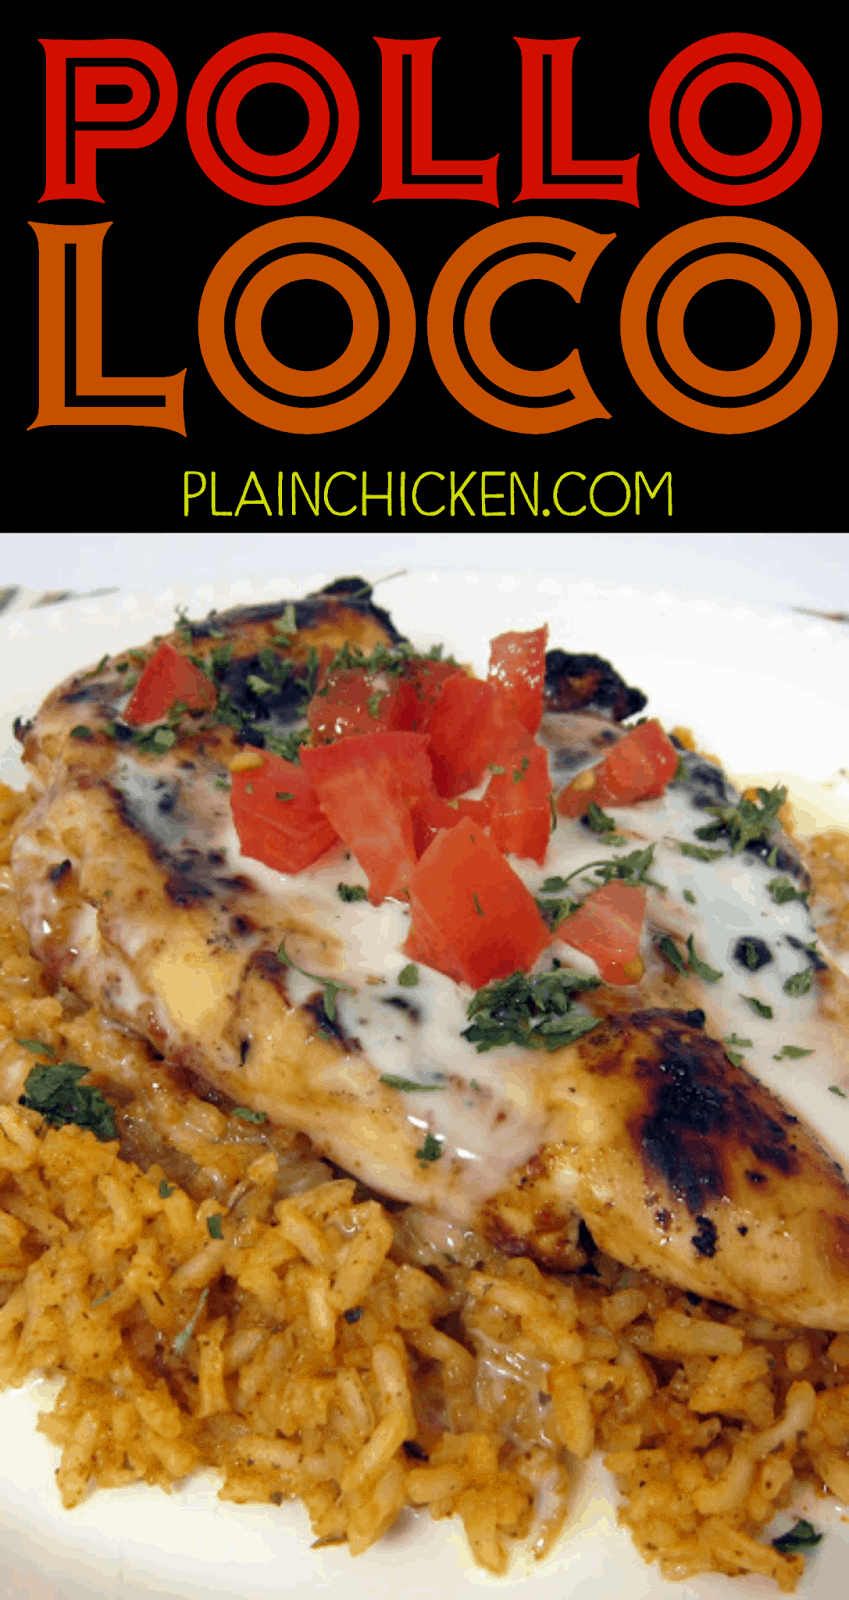 Pollo Loco - grilled chicken over Mexican rice and smothered in white queso - My favorite Mexican recipe! I literally licked my plate! SOOO good!!